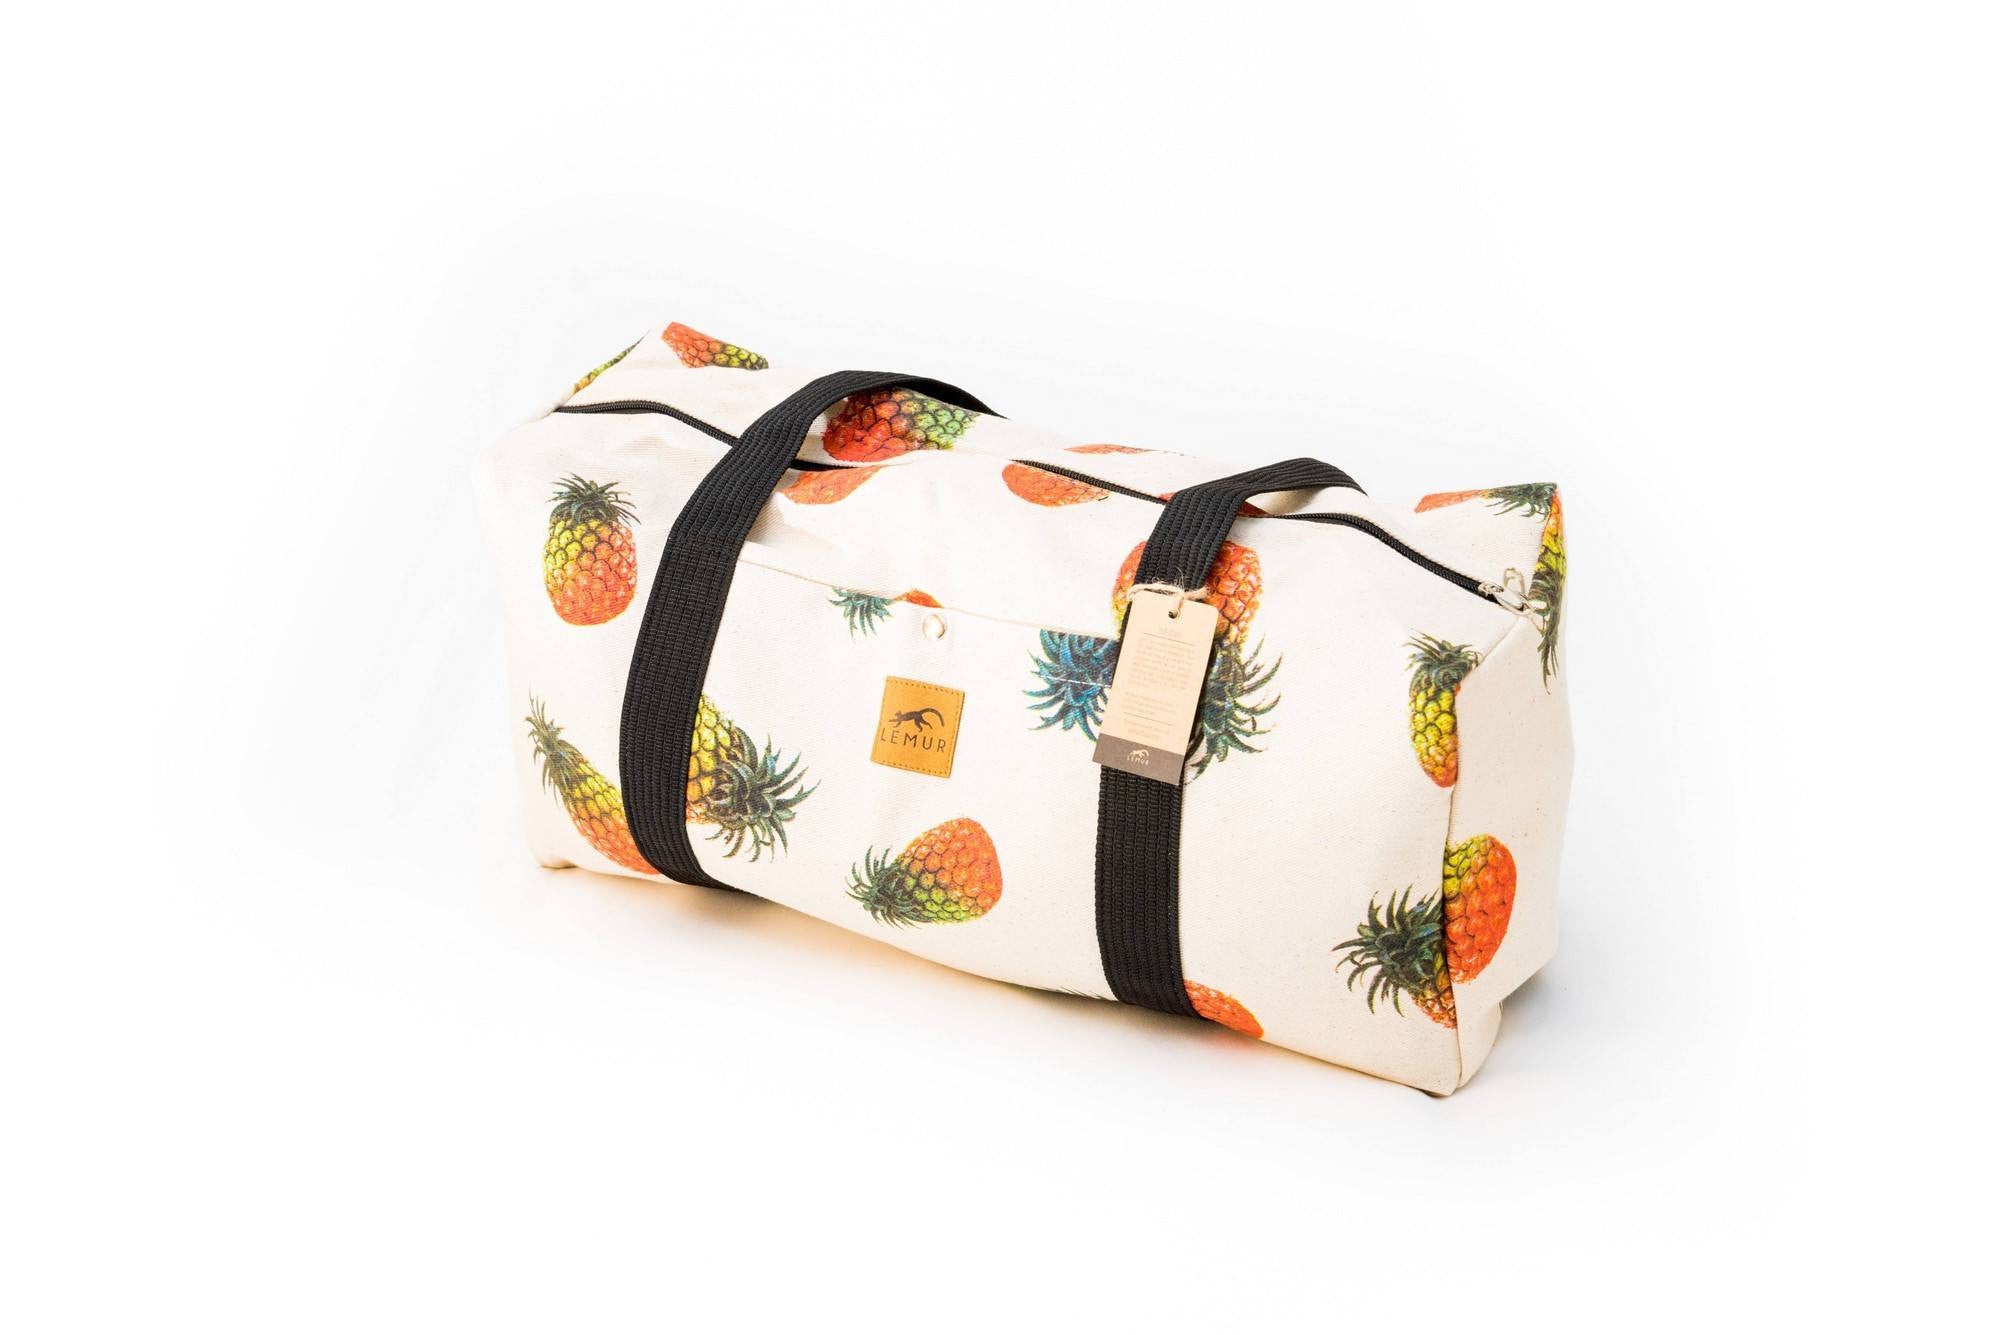 Canvas Duffel Bag - Canvas Duffel Bag - Gym Or Sports Bag, Carry-On Travel Luggage By Lemur Bags (Pineapples)